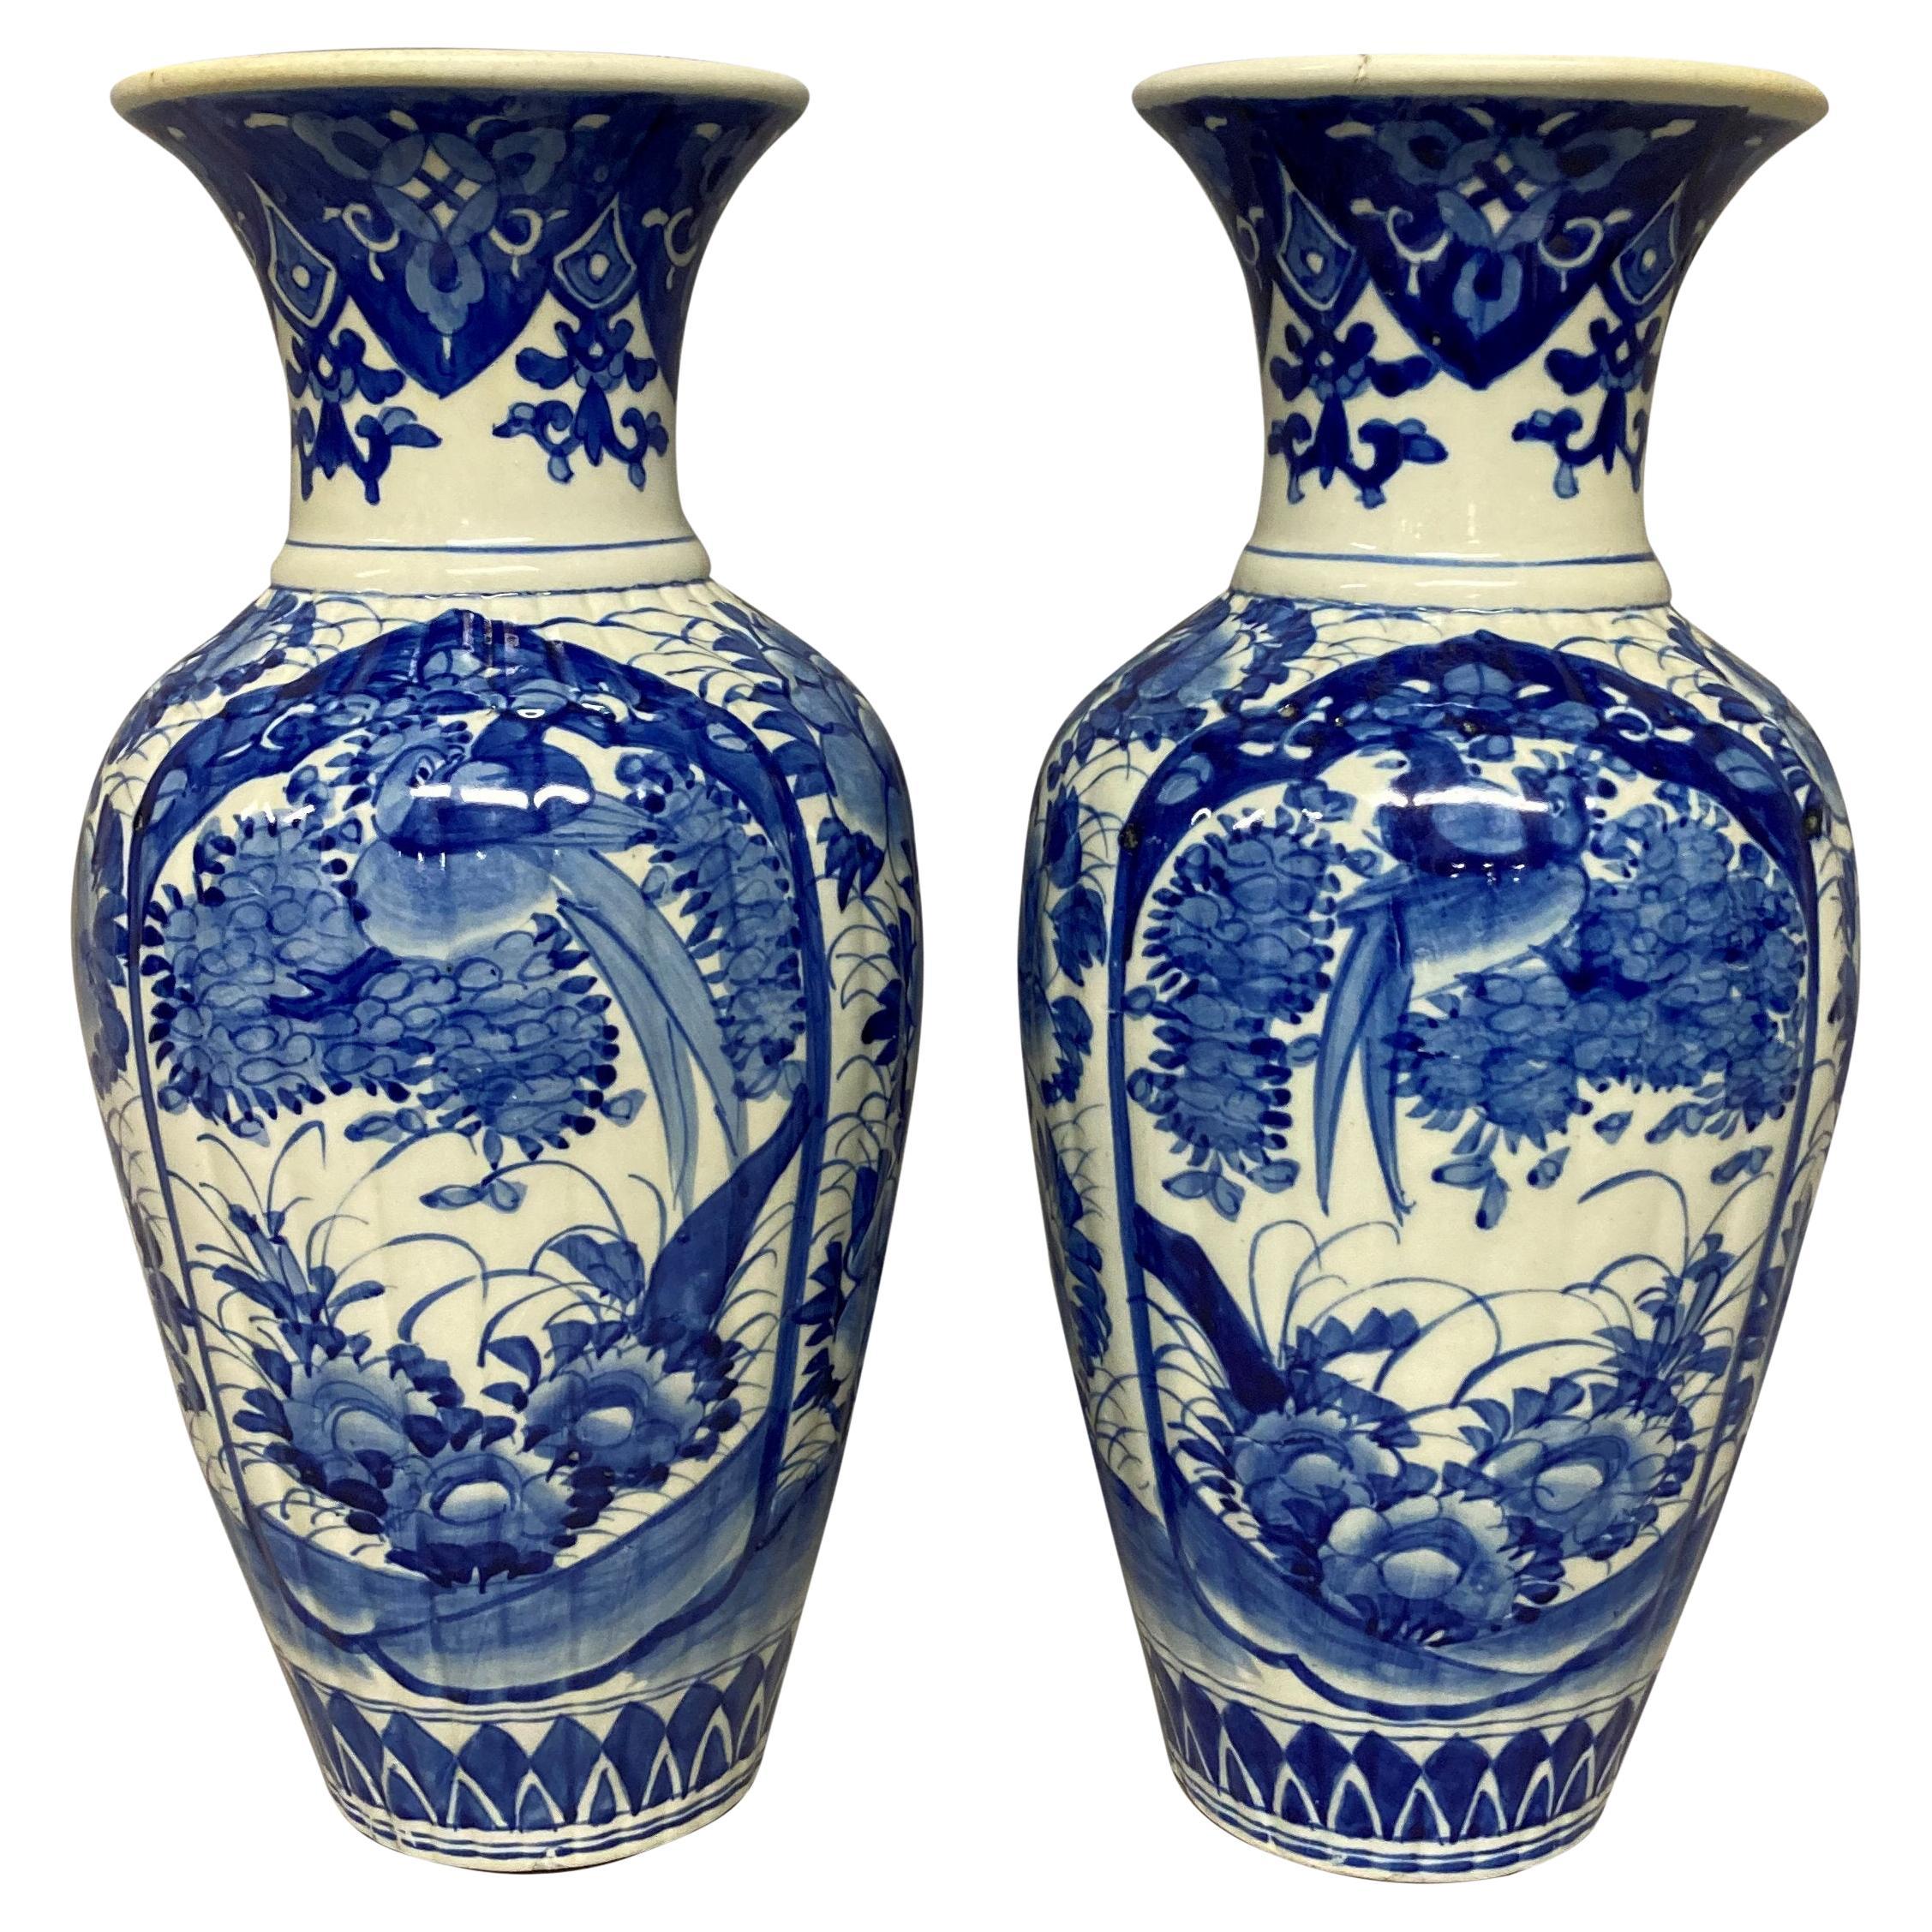 Pair Of 19th Century Chinese Blue & White Baluster Vases